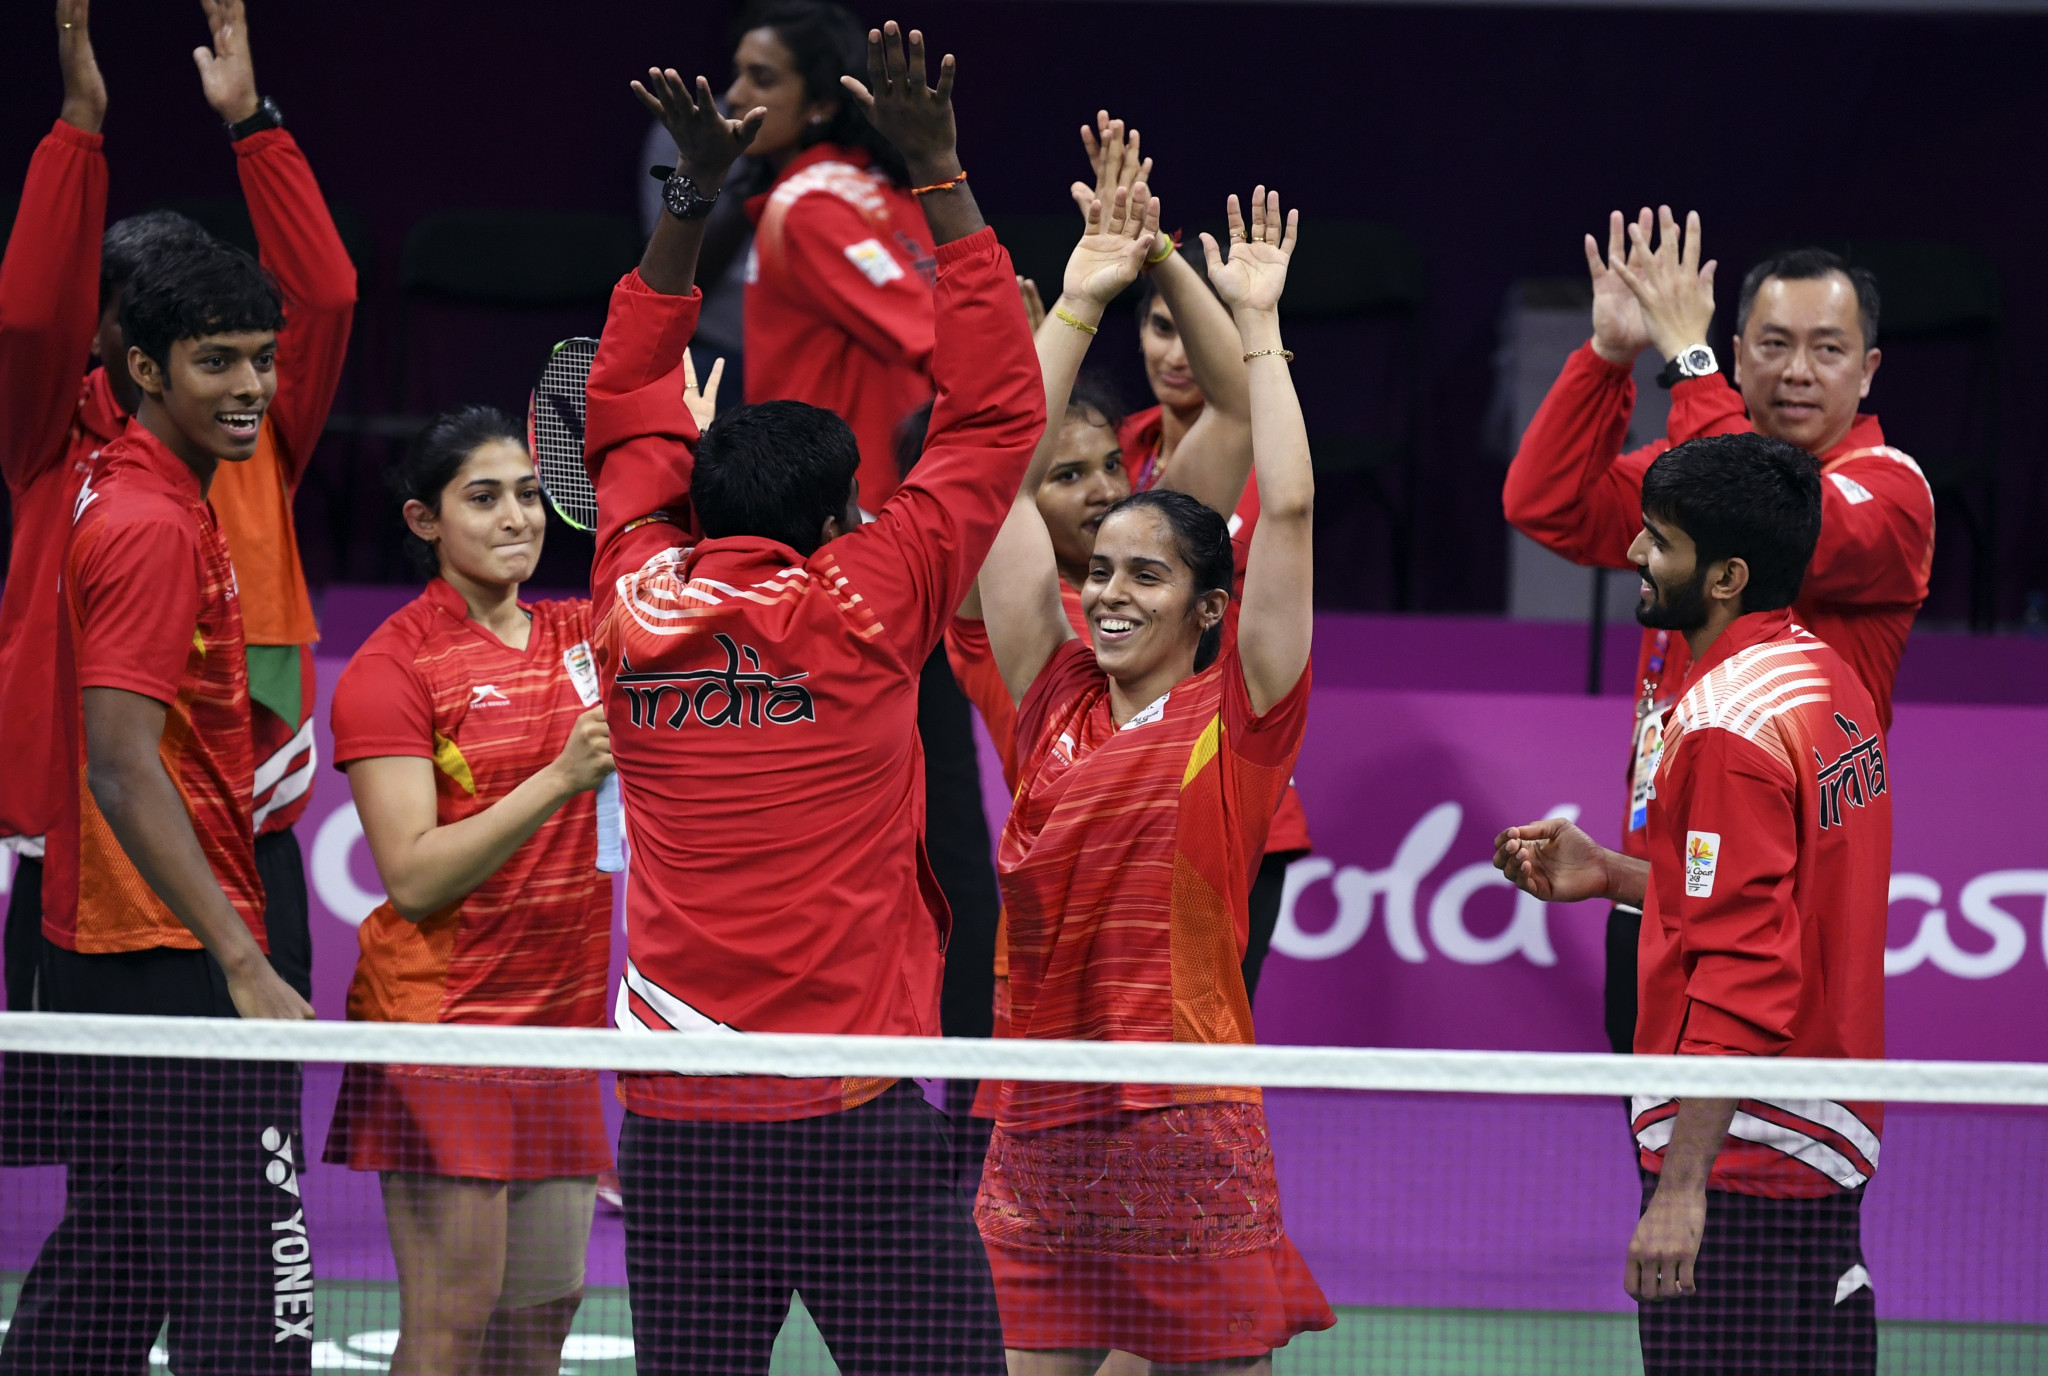 Champions India discover group for Commonwealth Games badminton mixed team event